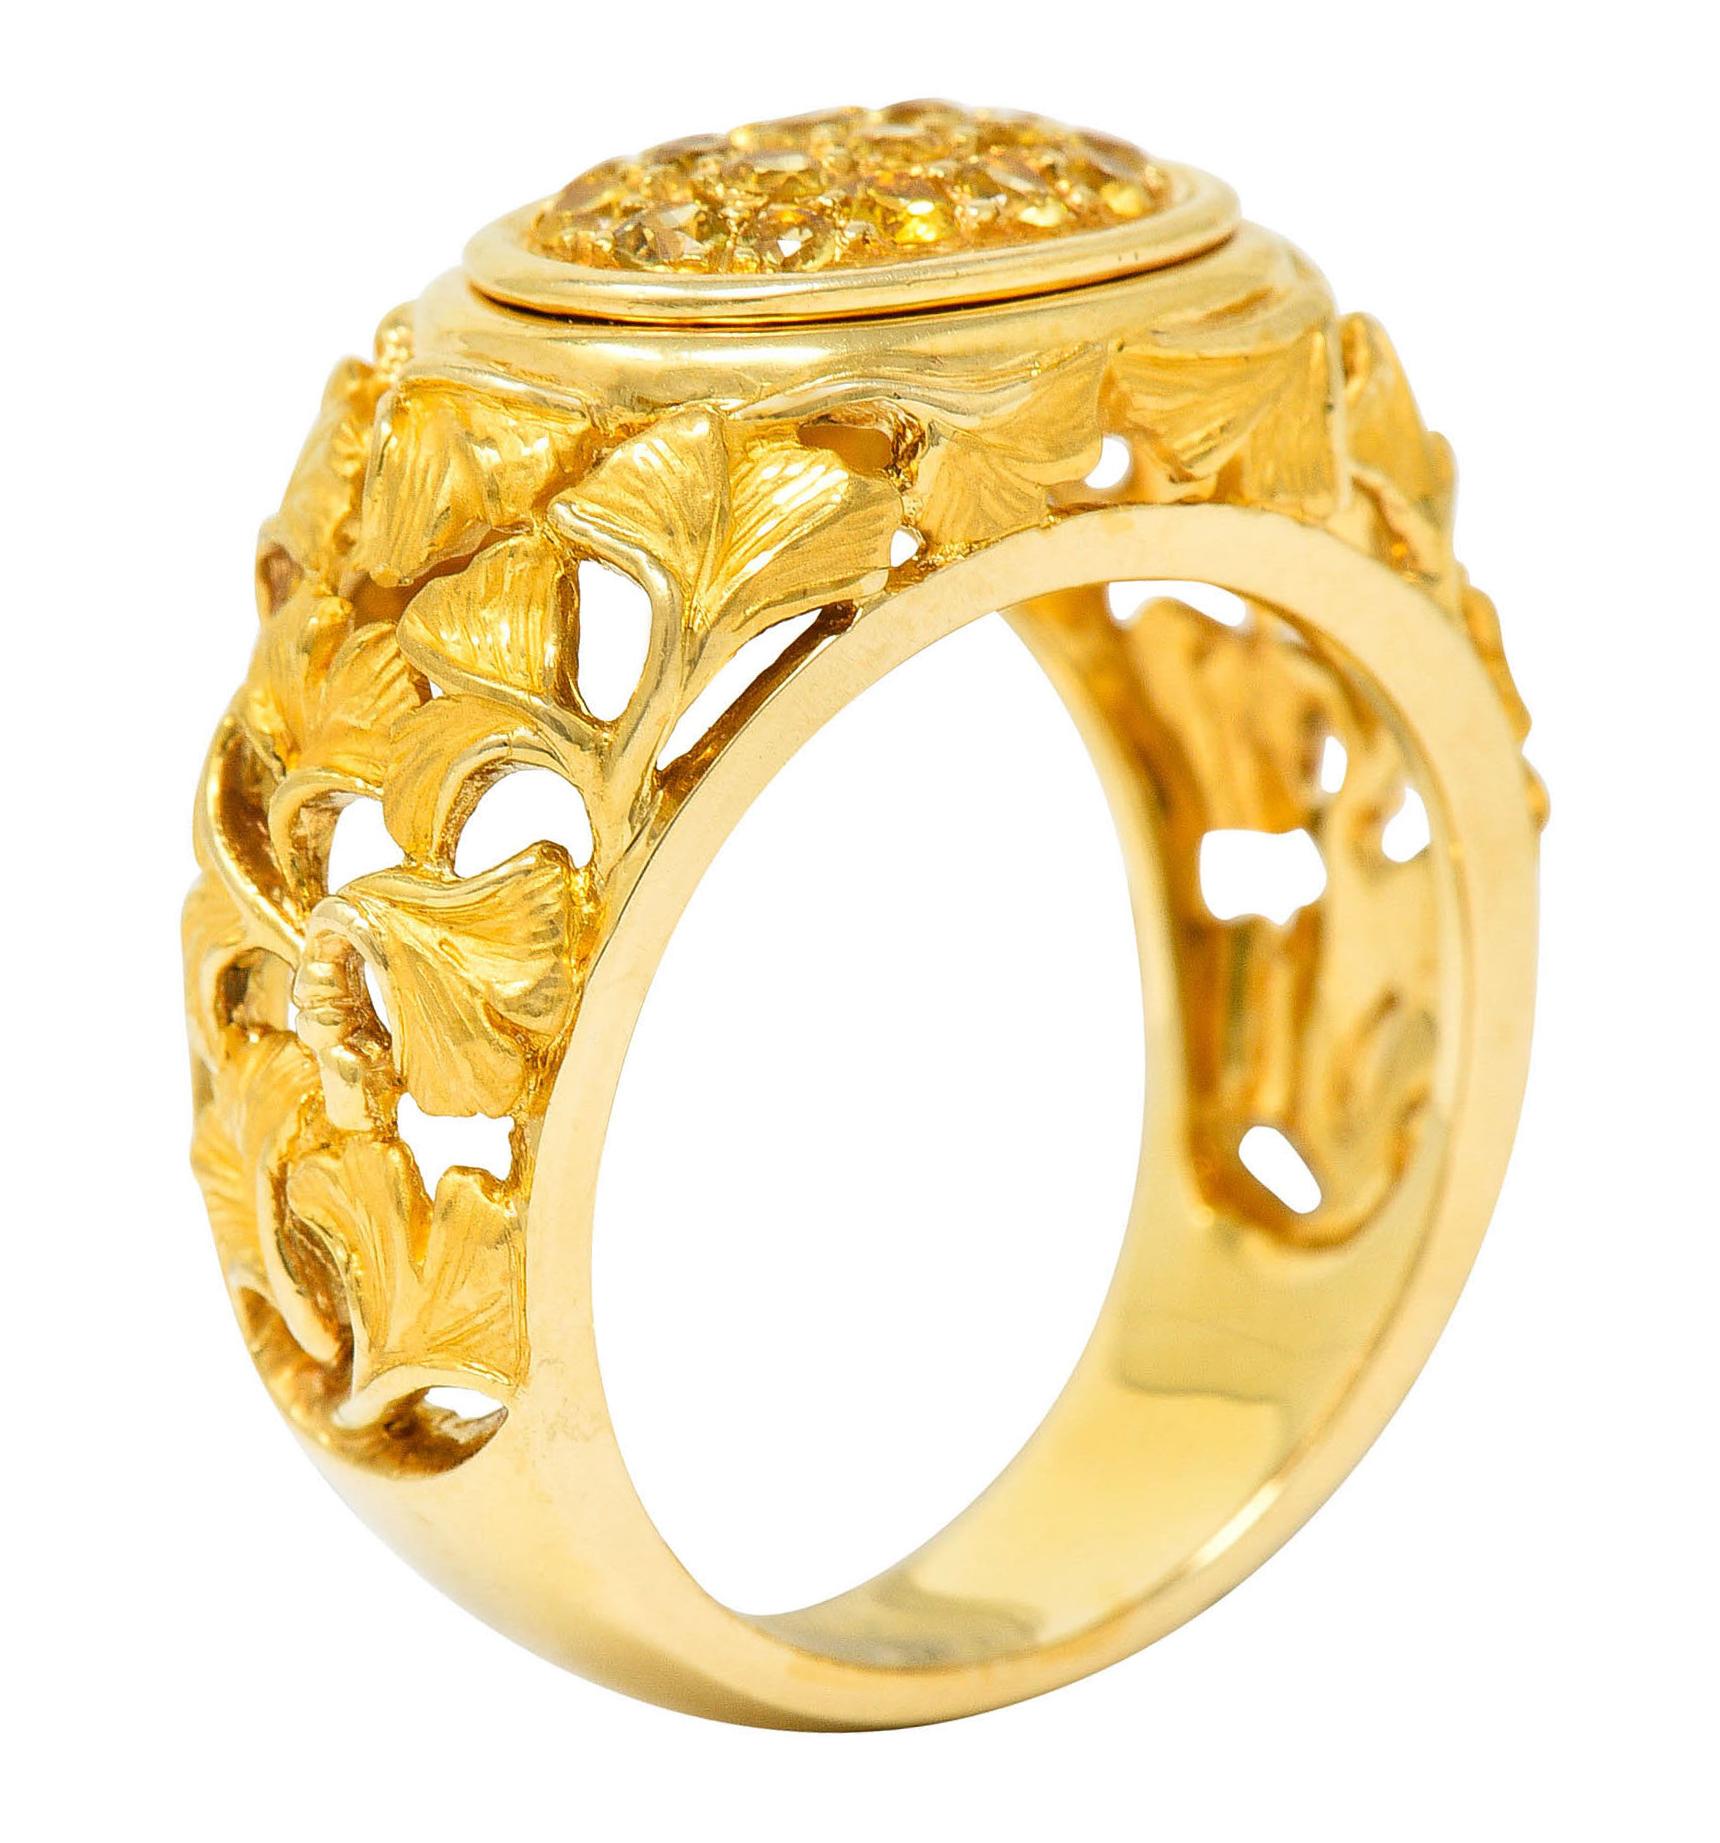 Band ring features a pierced design comprised of highly rendered ginkgo leaves

Centering an oval pavè field of yellow sapphires weighing in total approximately 0.75 carat

Stamped 750 for 18 karat gold with a Spanish assay mark for Madrid

Numbered